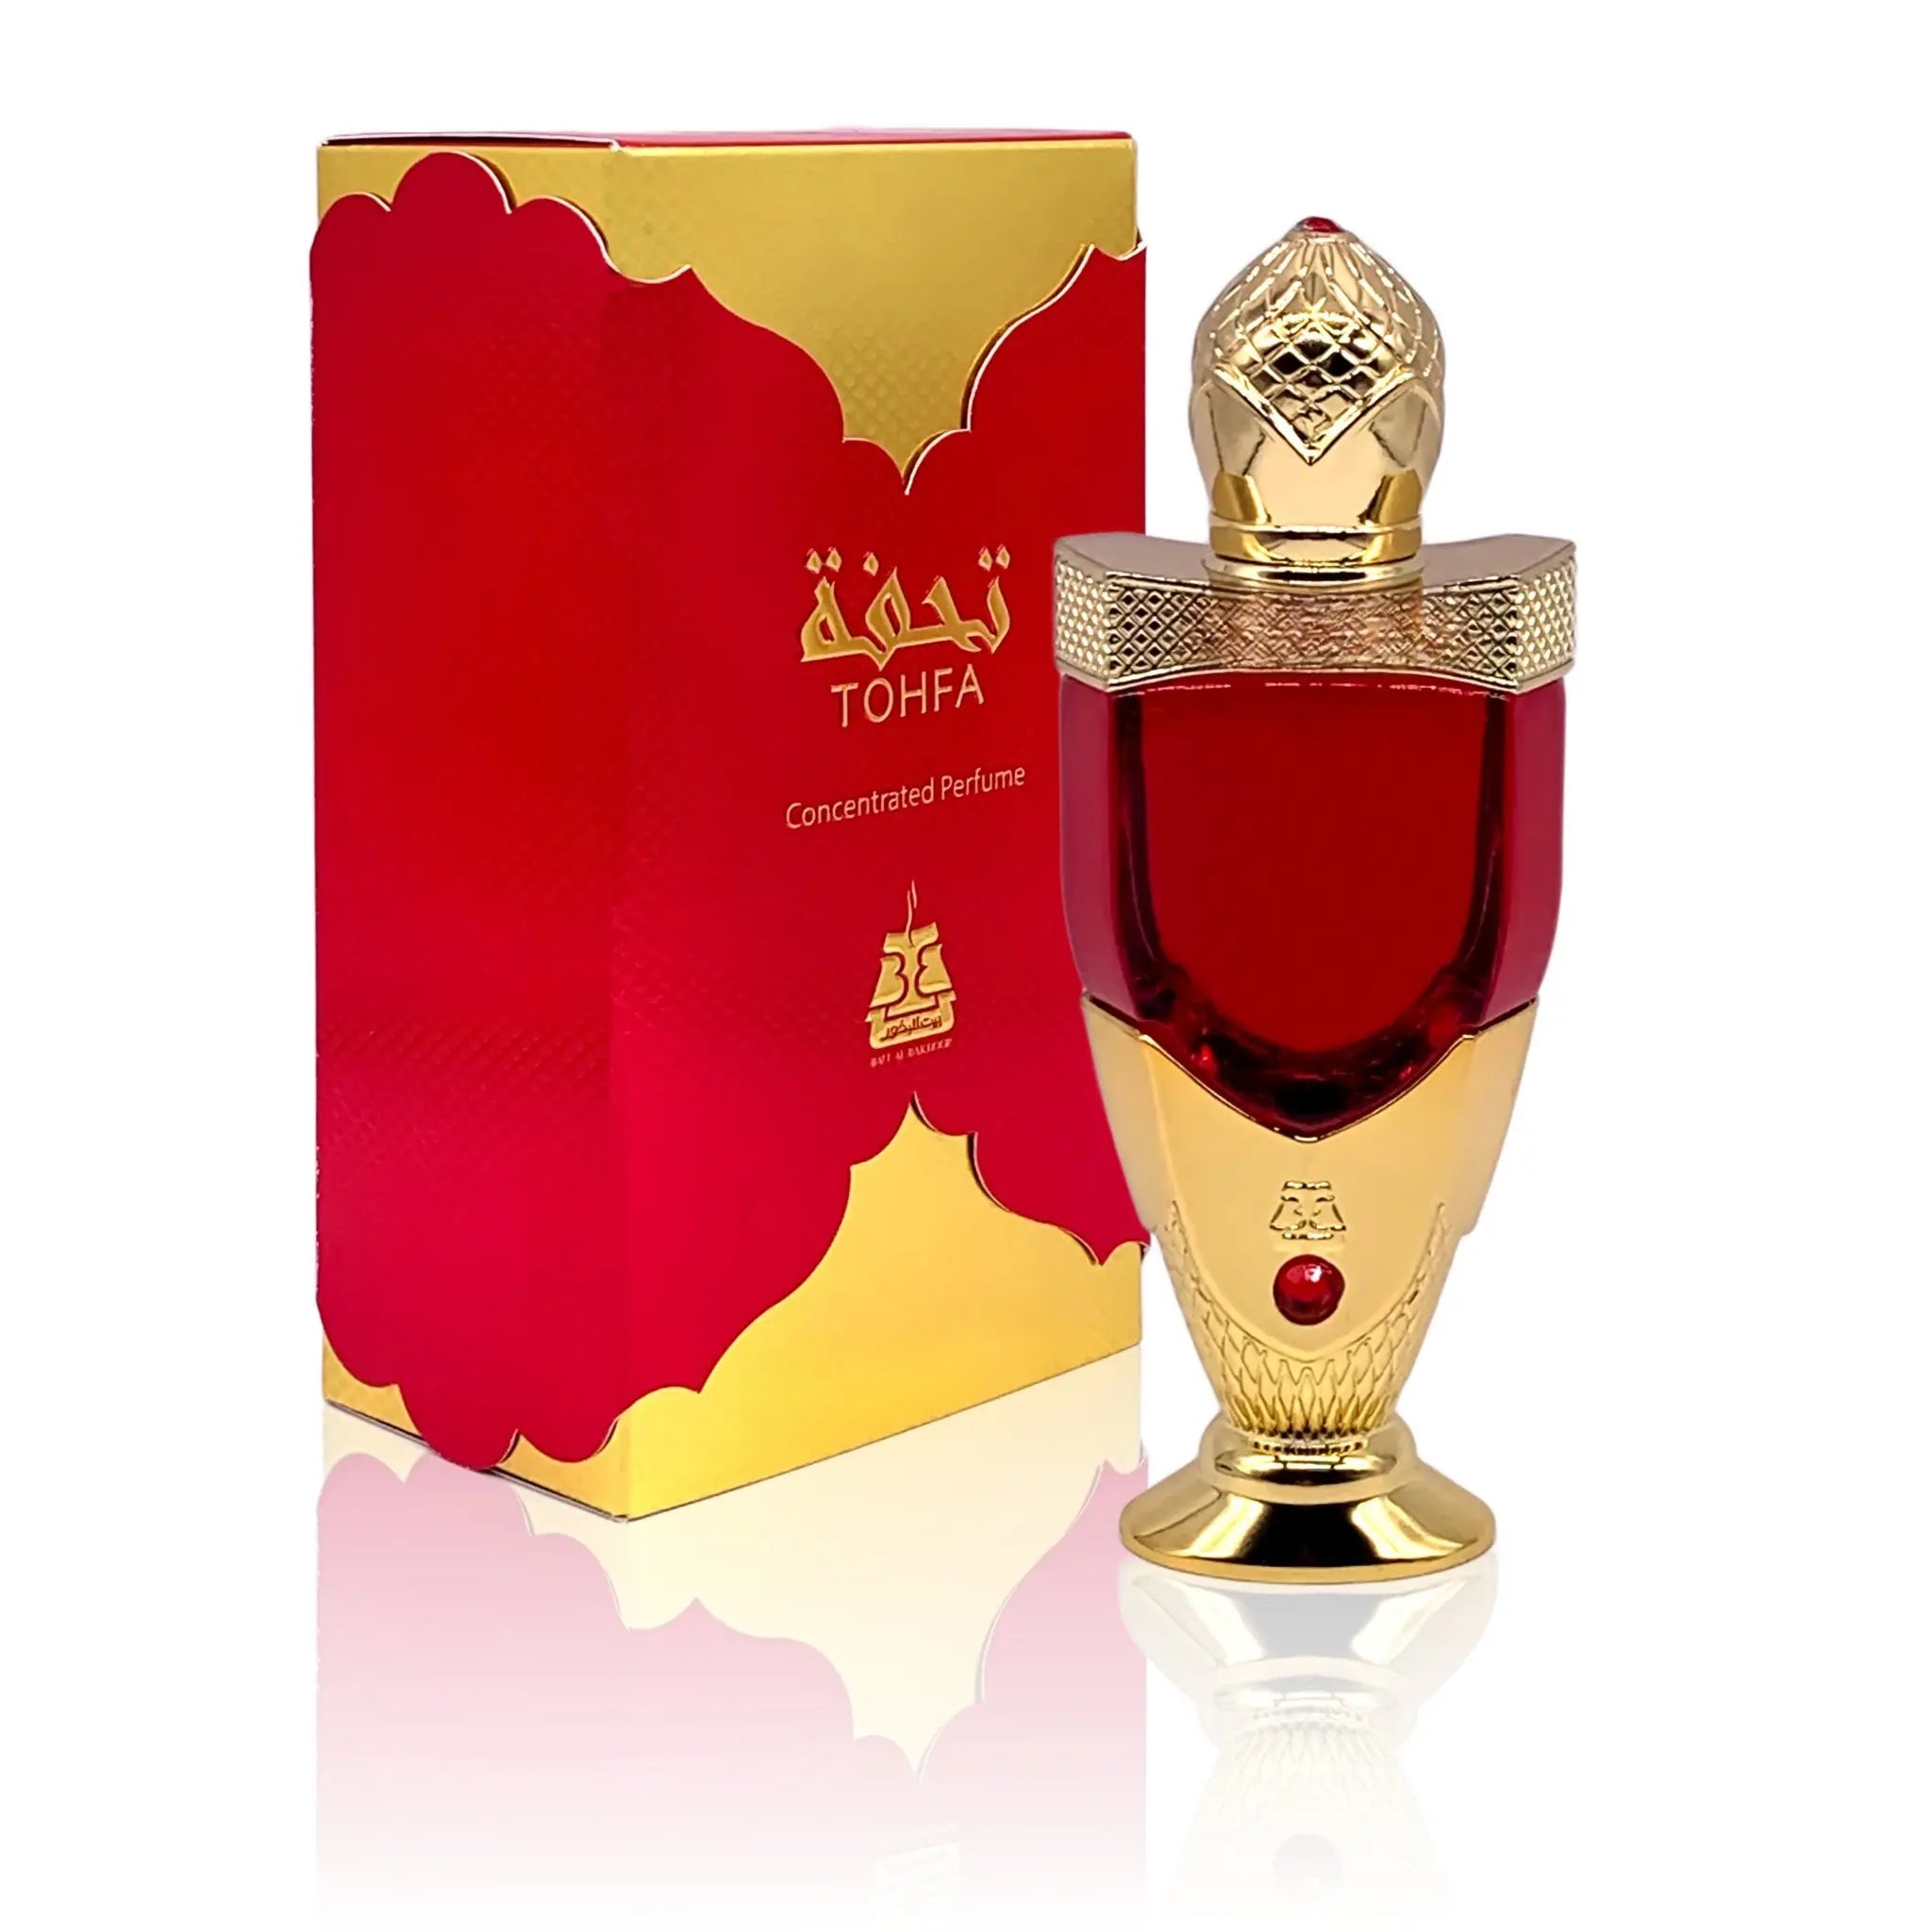 The image shows a luxurious perfume bottle next to its packaging. The bottle has a rich red color with a golden cap, detailed with intricate patterns and topped with a clear faceted finial that resembles a gem. The base and neck of the bottle also feature golden accents. A red gem is embedded in the golden section of the bottle. The packaging box is red with a golden border and carries the brand name "TOHFA" in gold lettering.